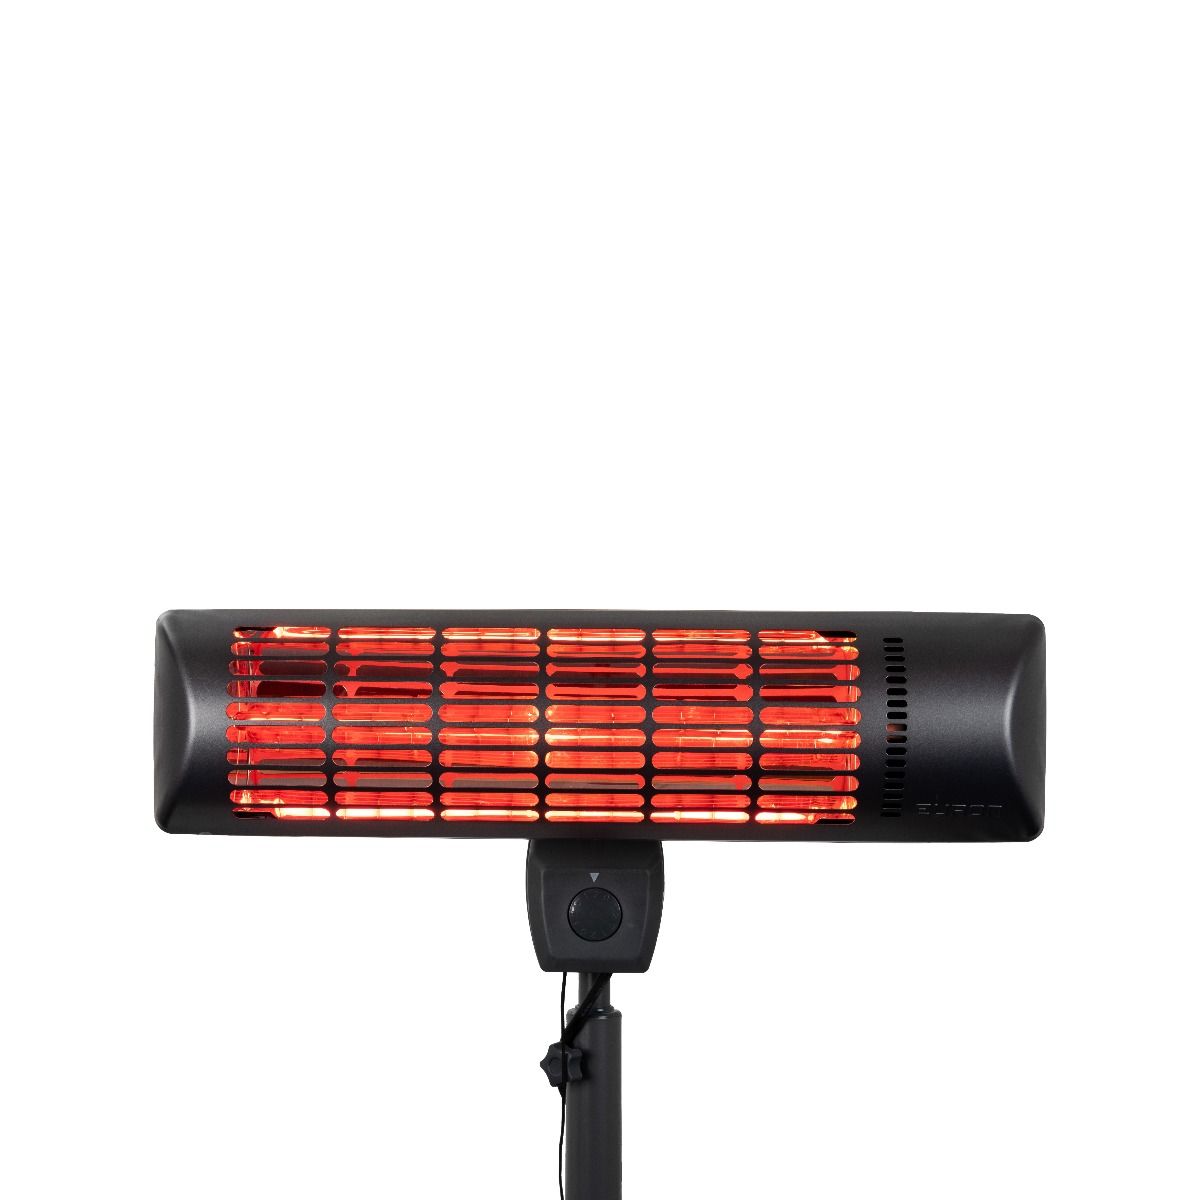 Eurom Q-time 1800S Golden patio heater